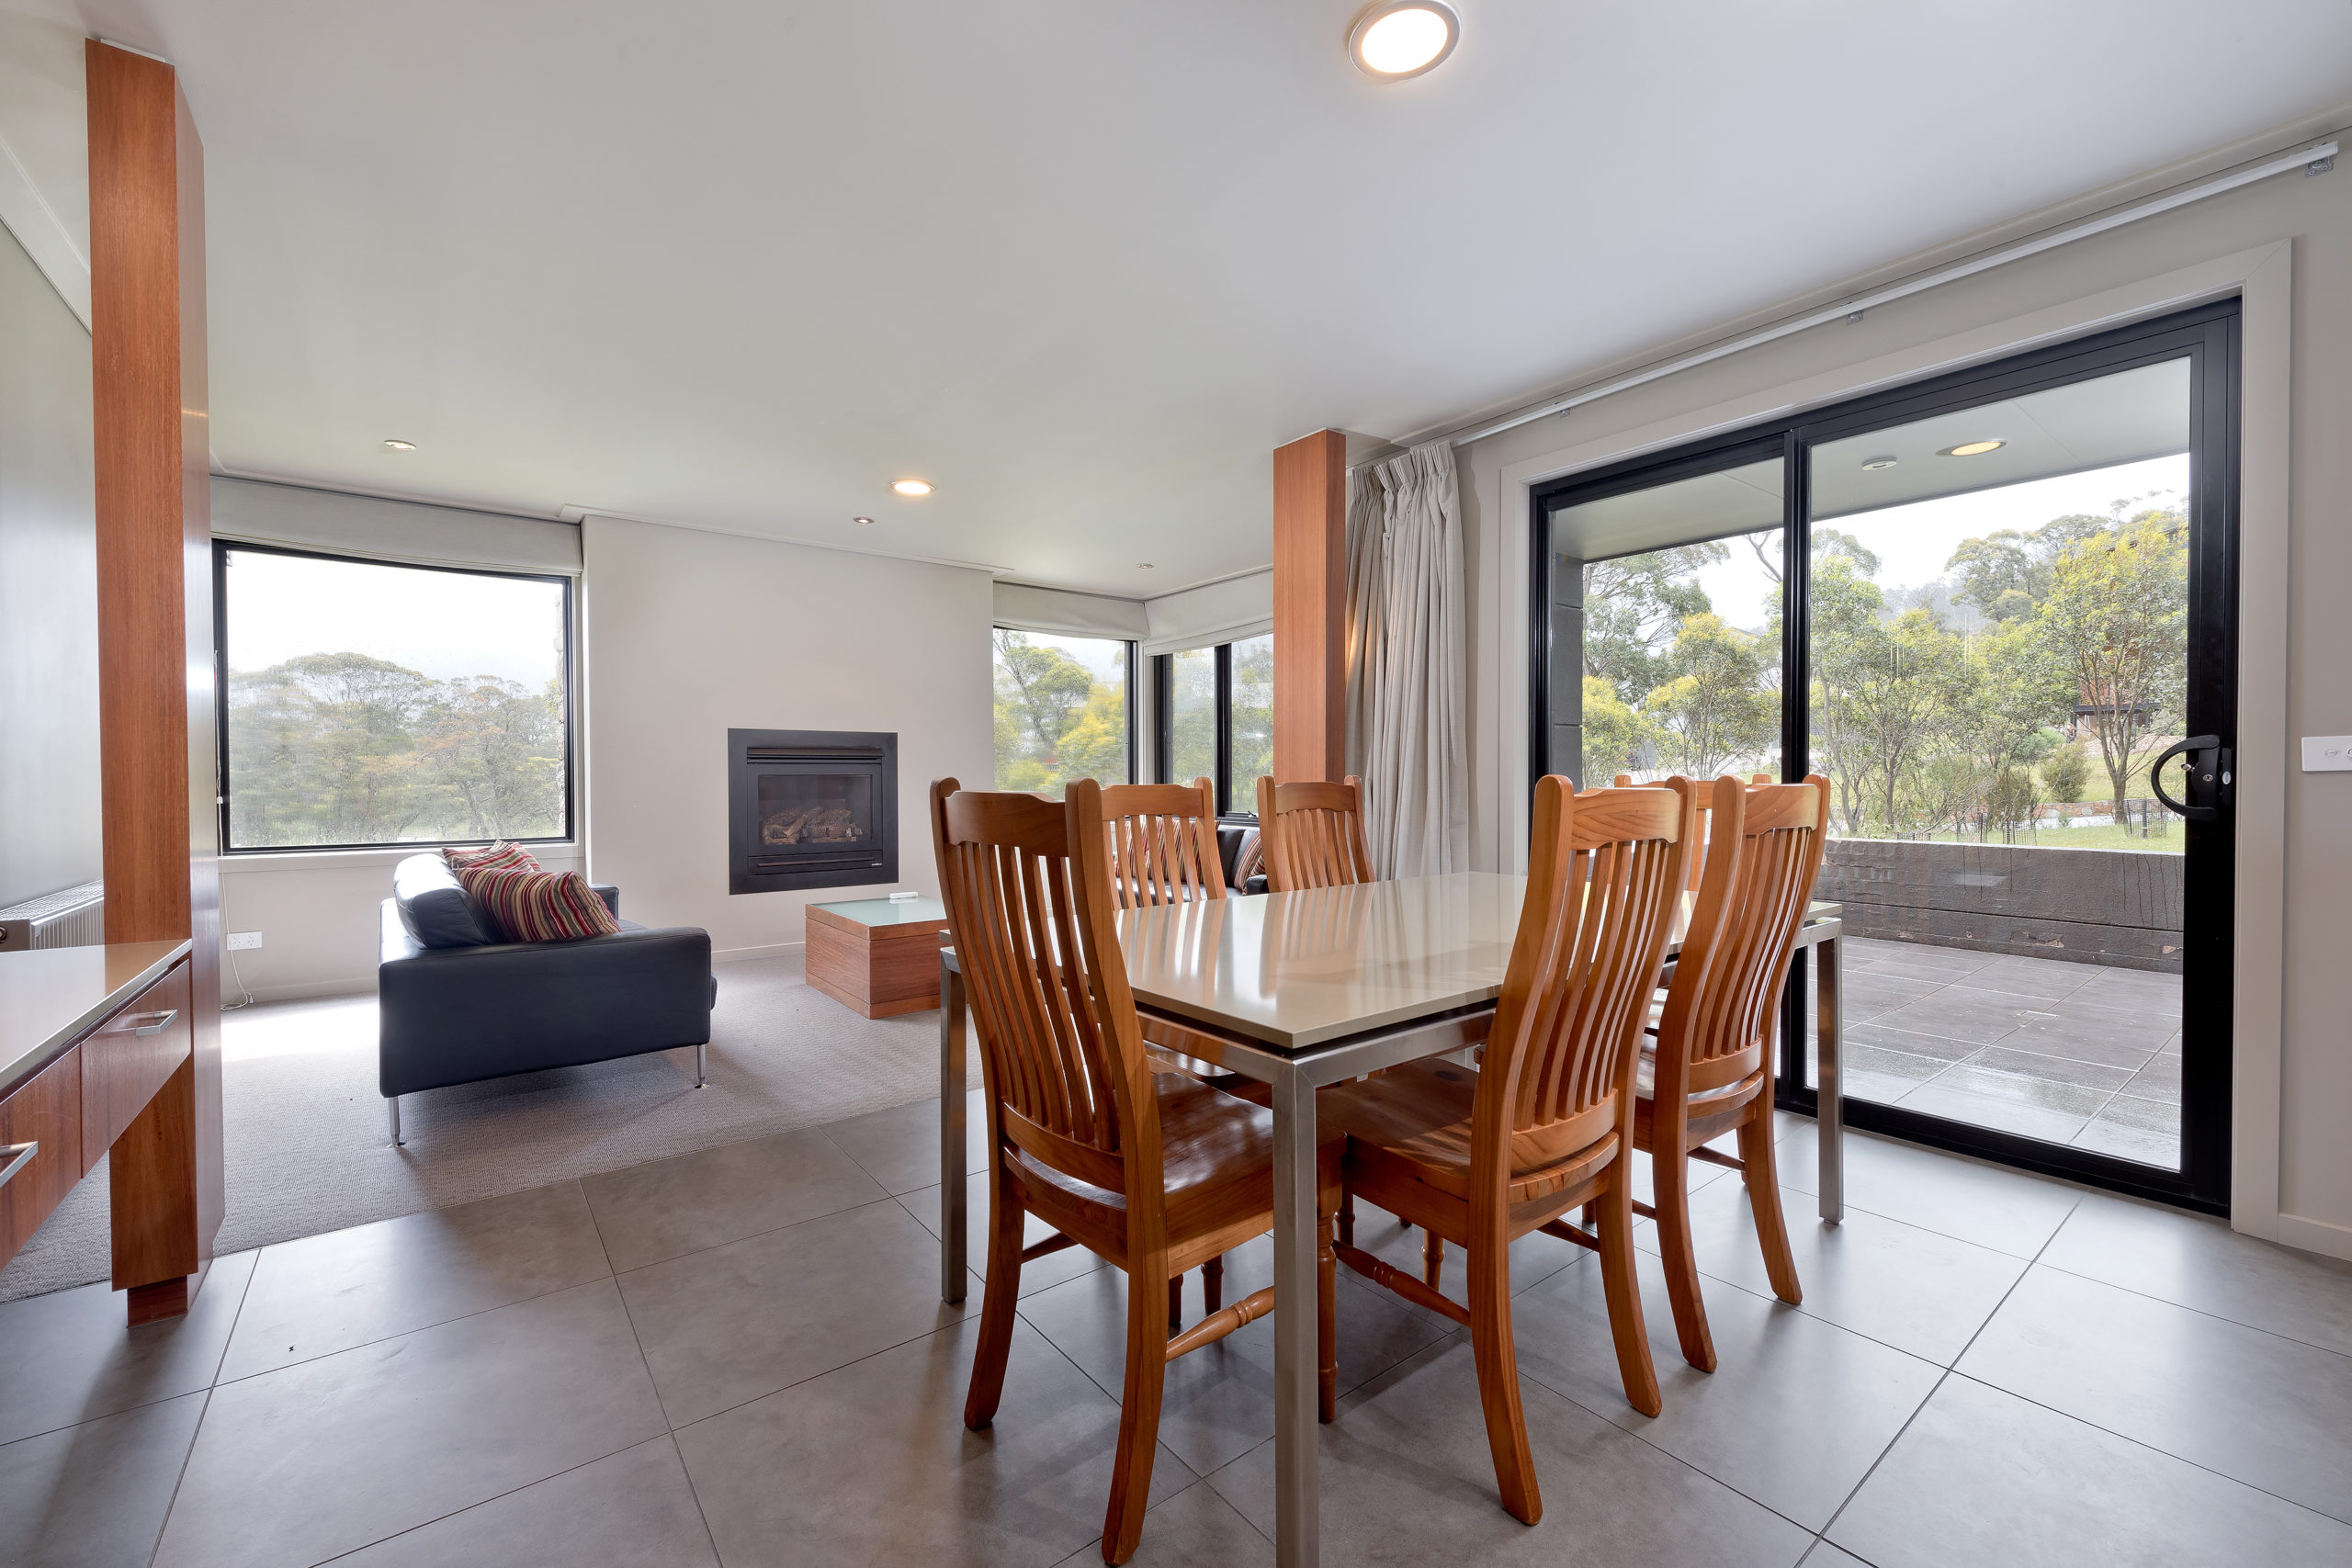 Magnificent Two Storey Fully Furnished 3 Bedroom Chalet at beautiful Lake Crackenback – $1,450,000